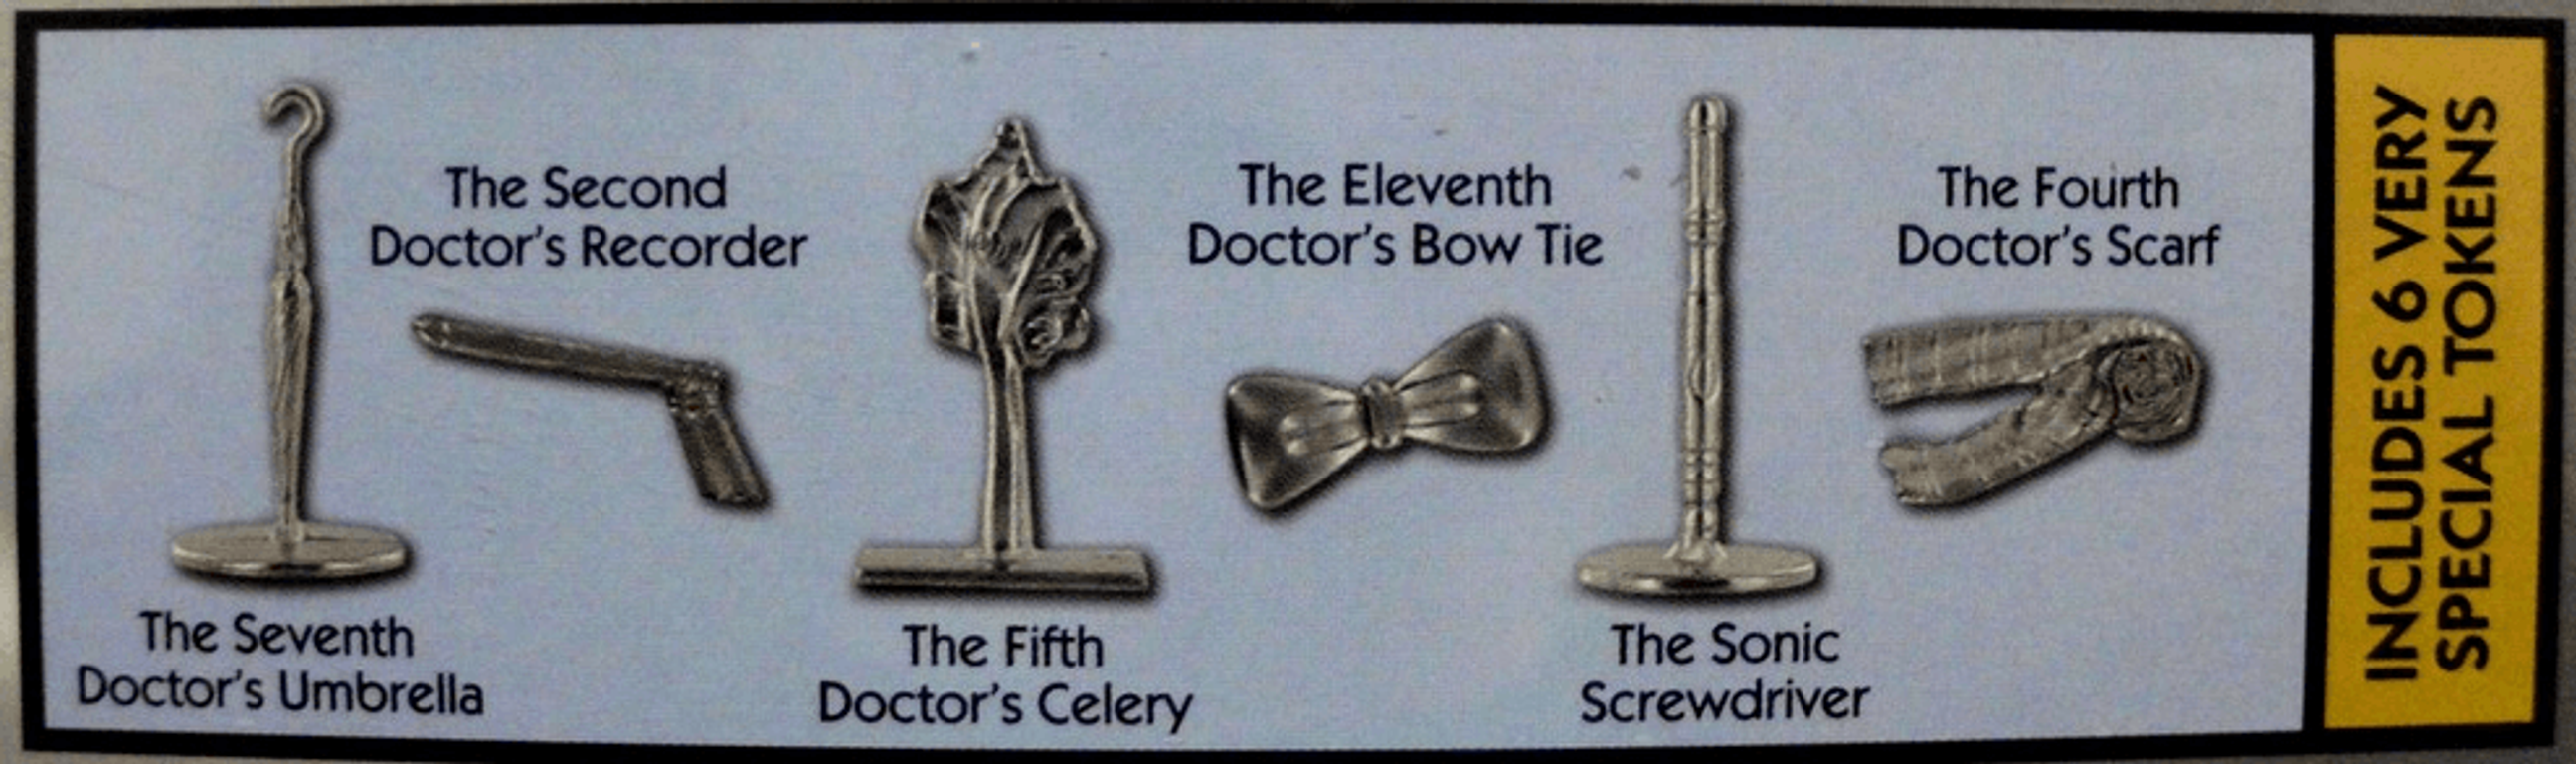 Doctor Who Monopoly 50th Anniversary Collectors Edition components